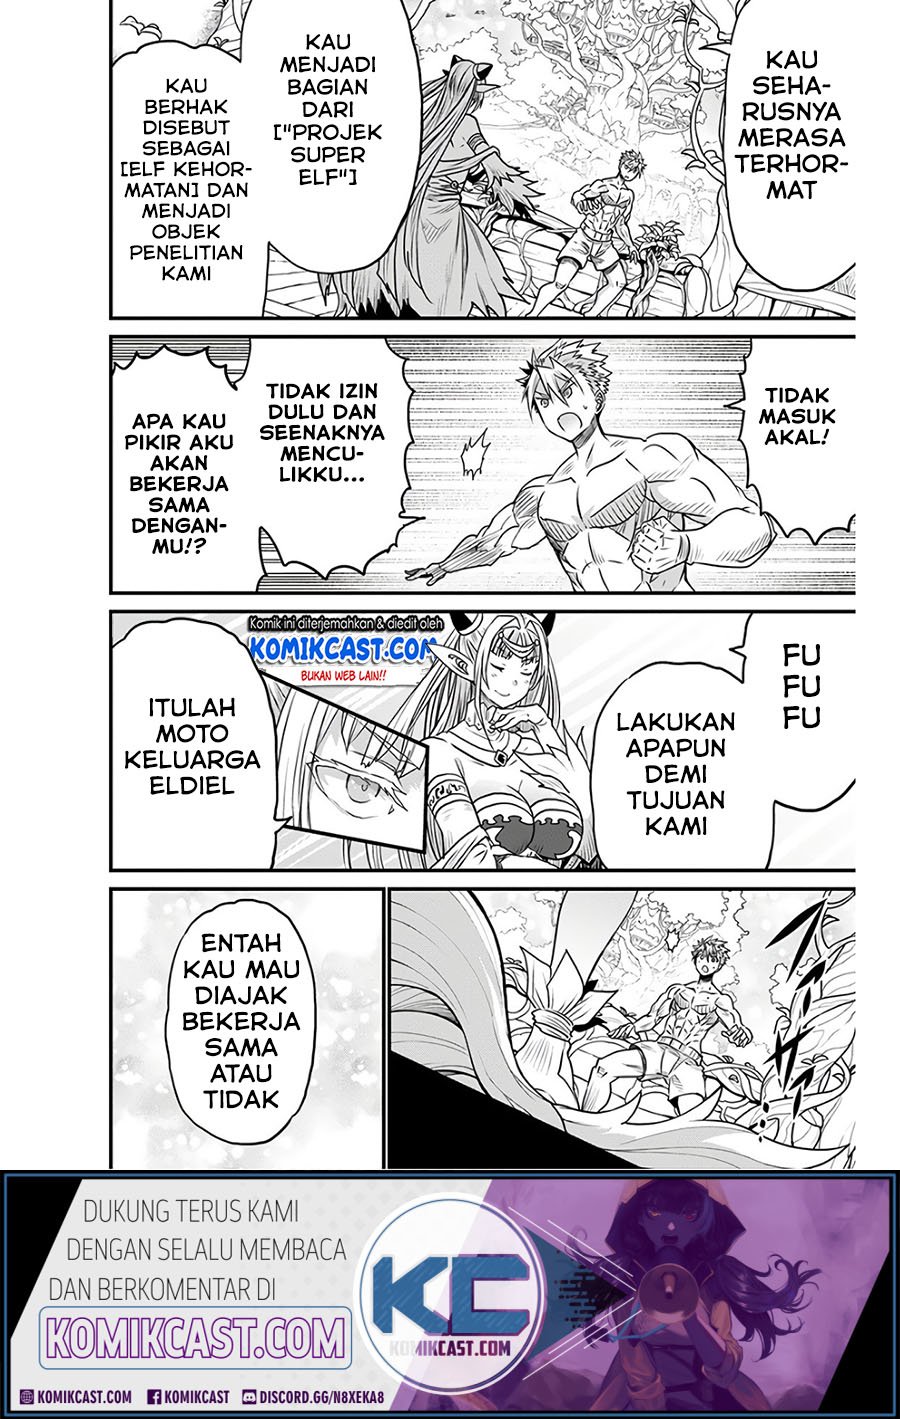 Peter Grill to Kenja no Jikan Chapter 28-2